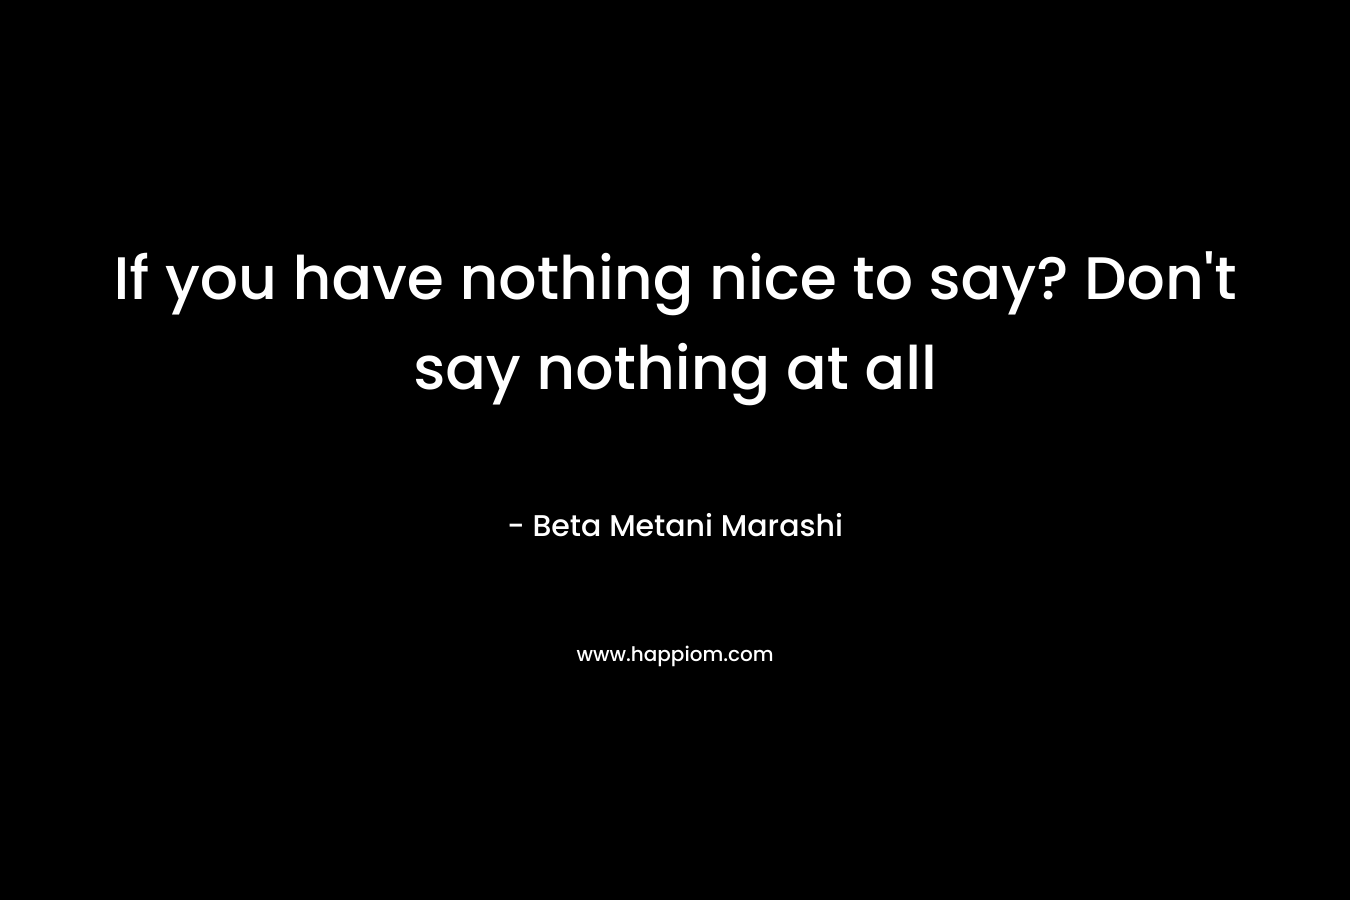 If you have nothing nice to say? Don't say nothing at all